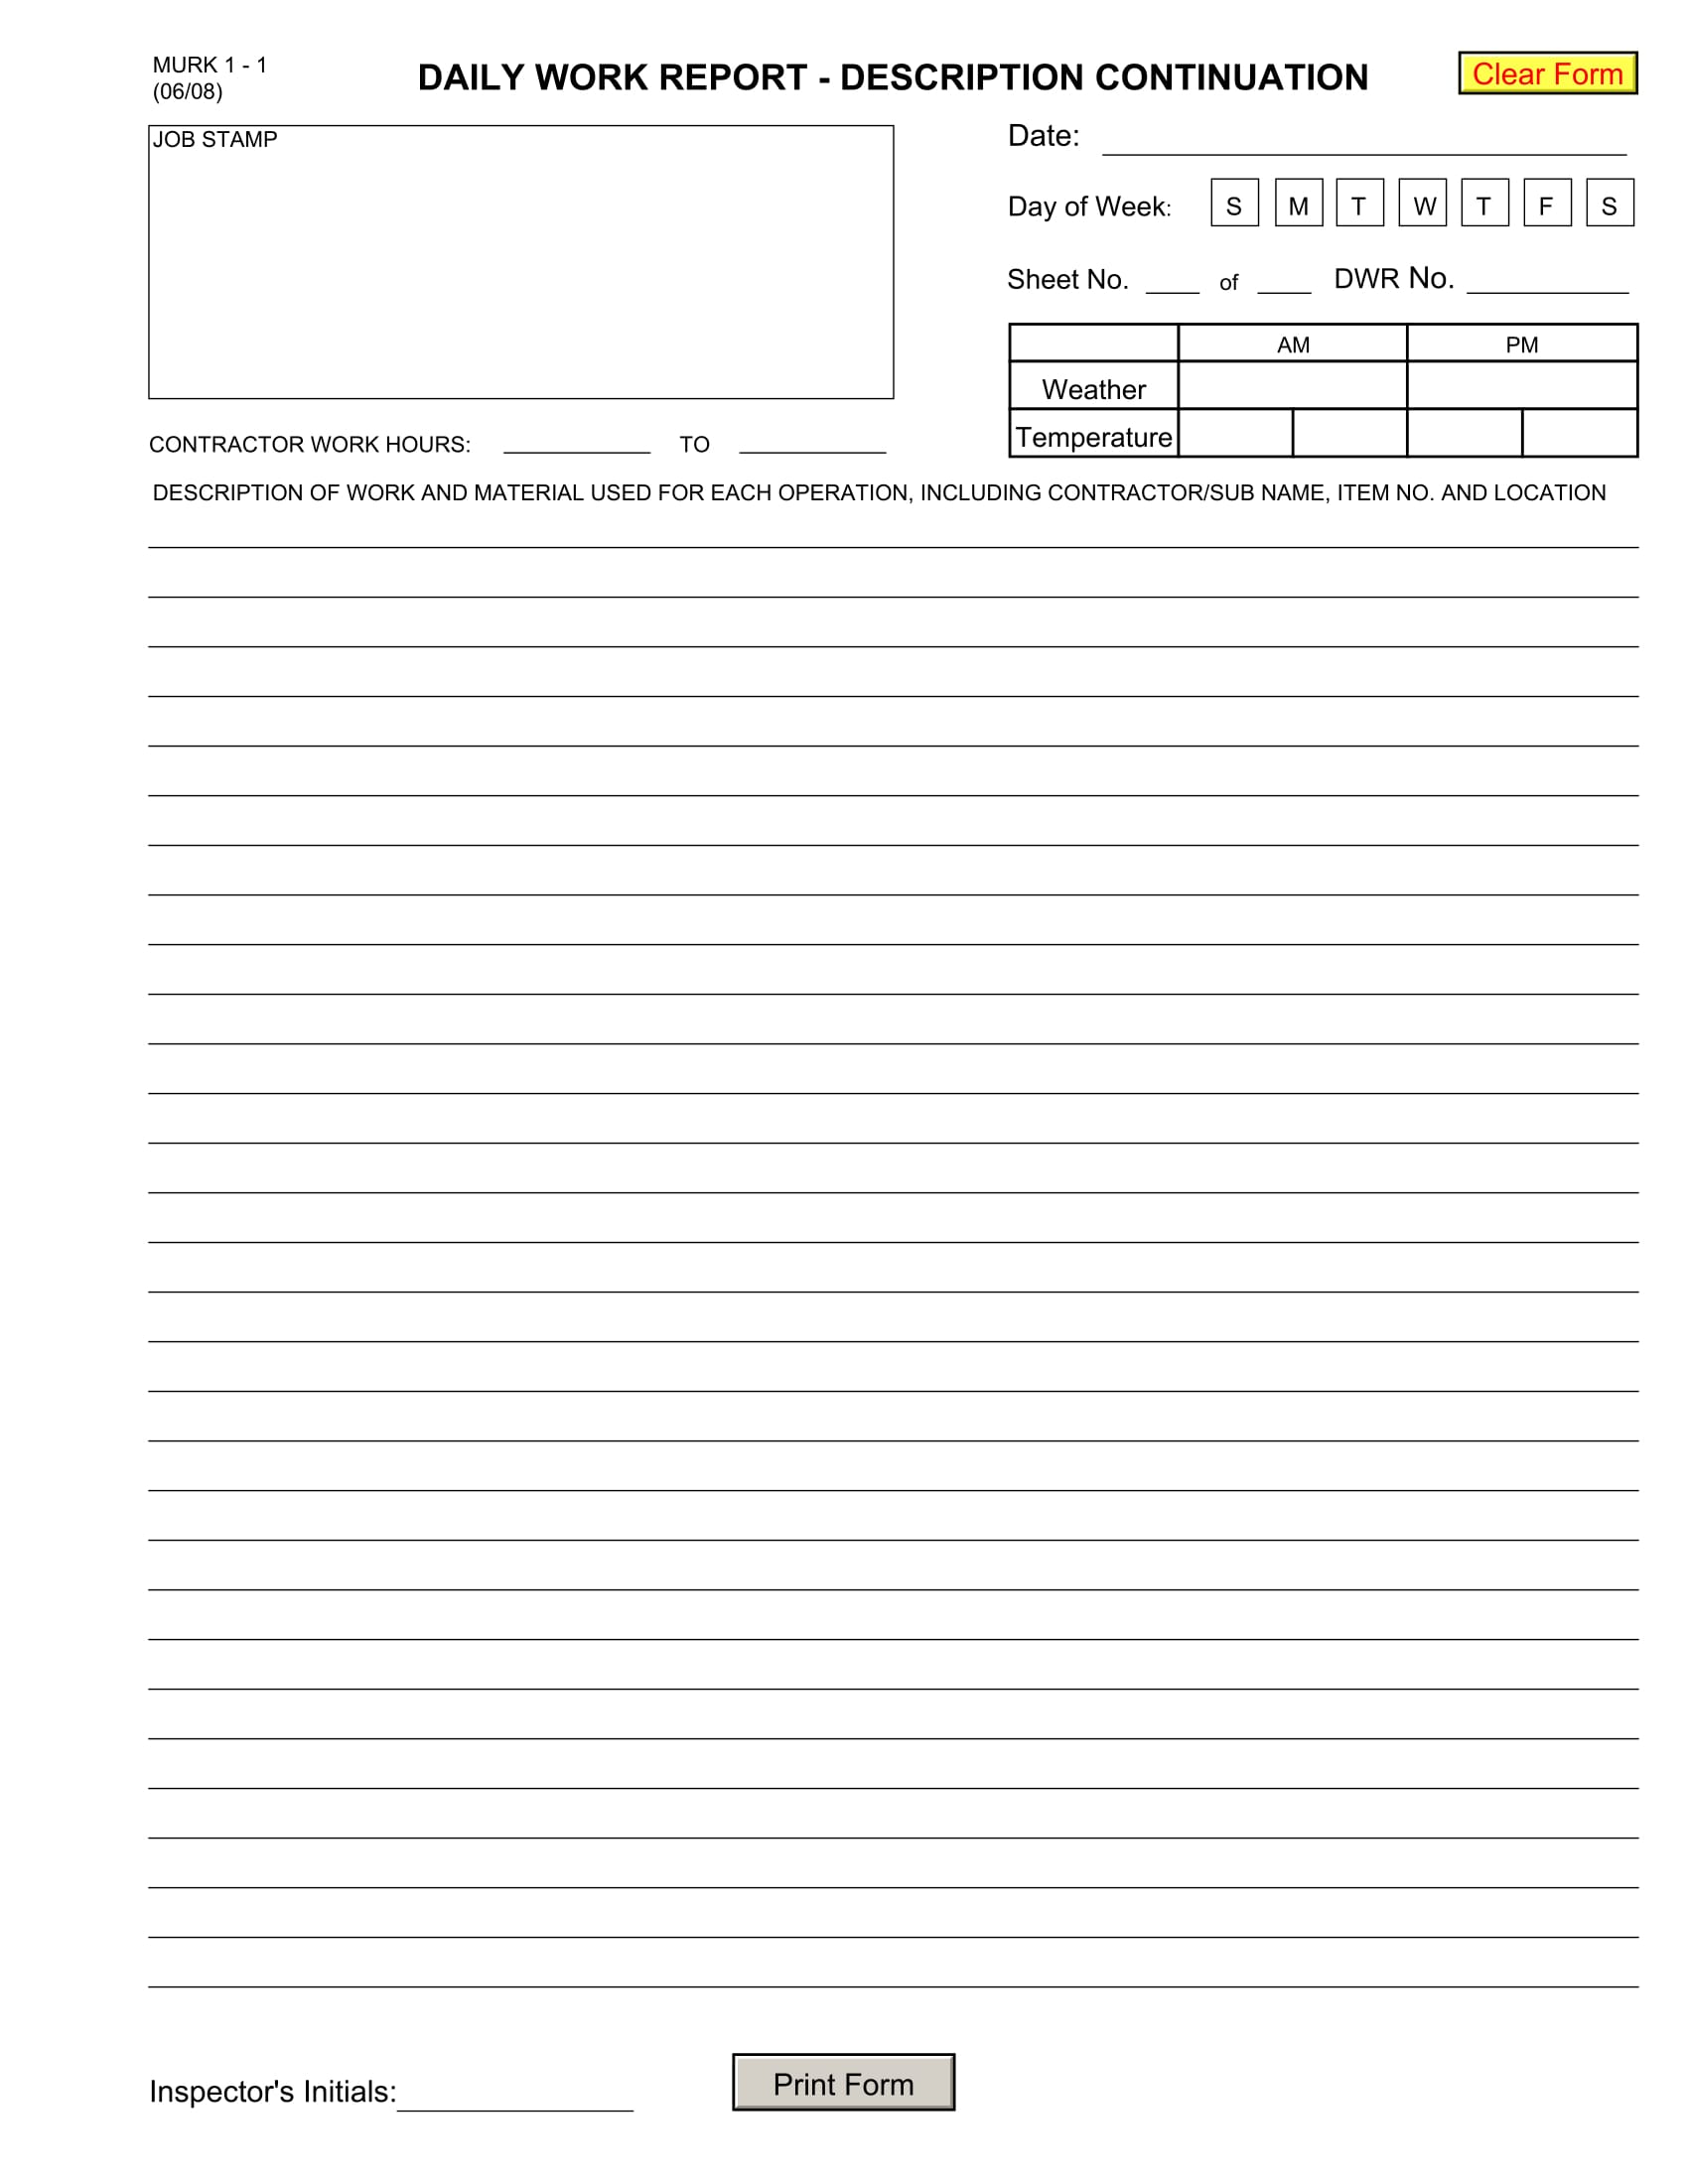 daily work report form 1